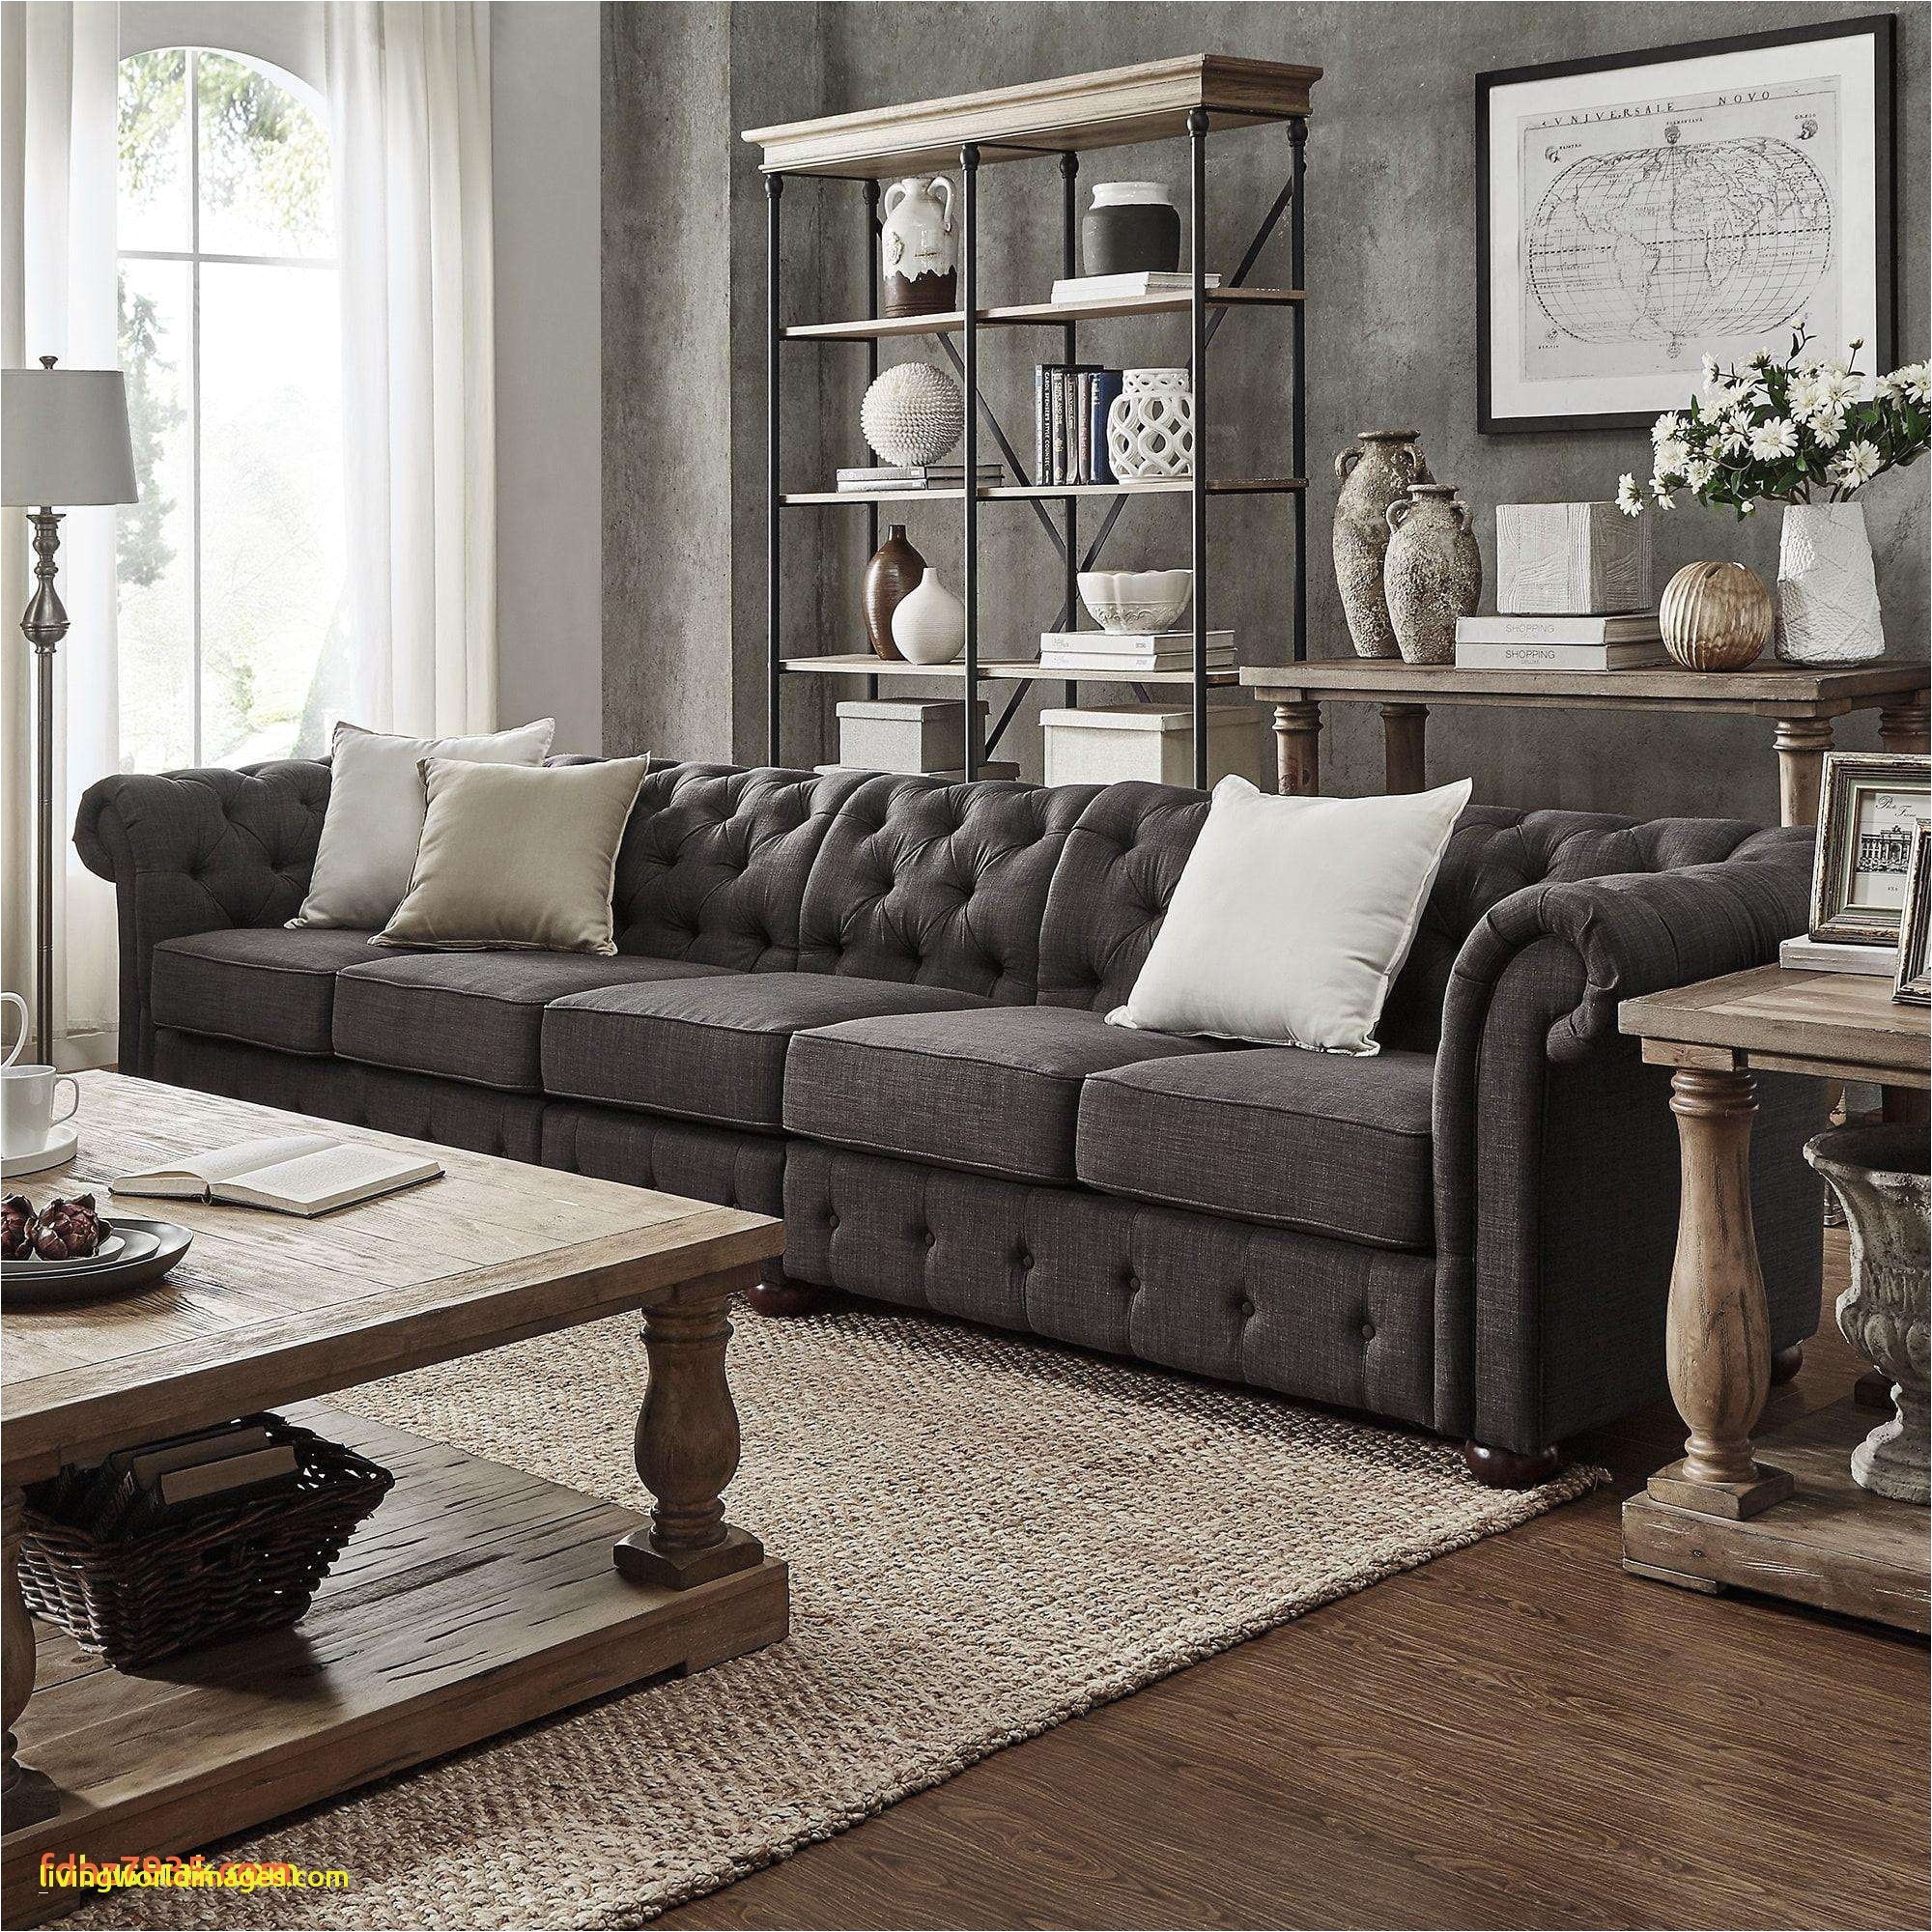 black sofas living room design fresh overstock couches 0d tags wonderful luxury overstock couches